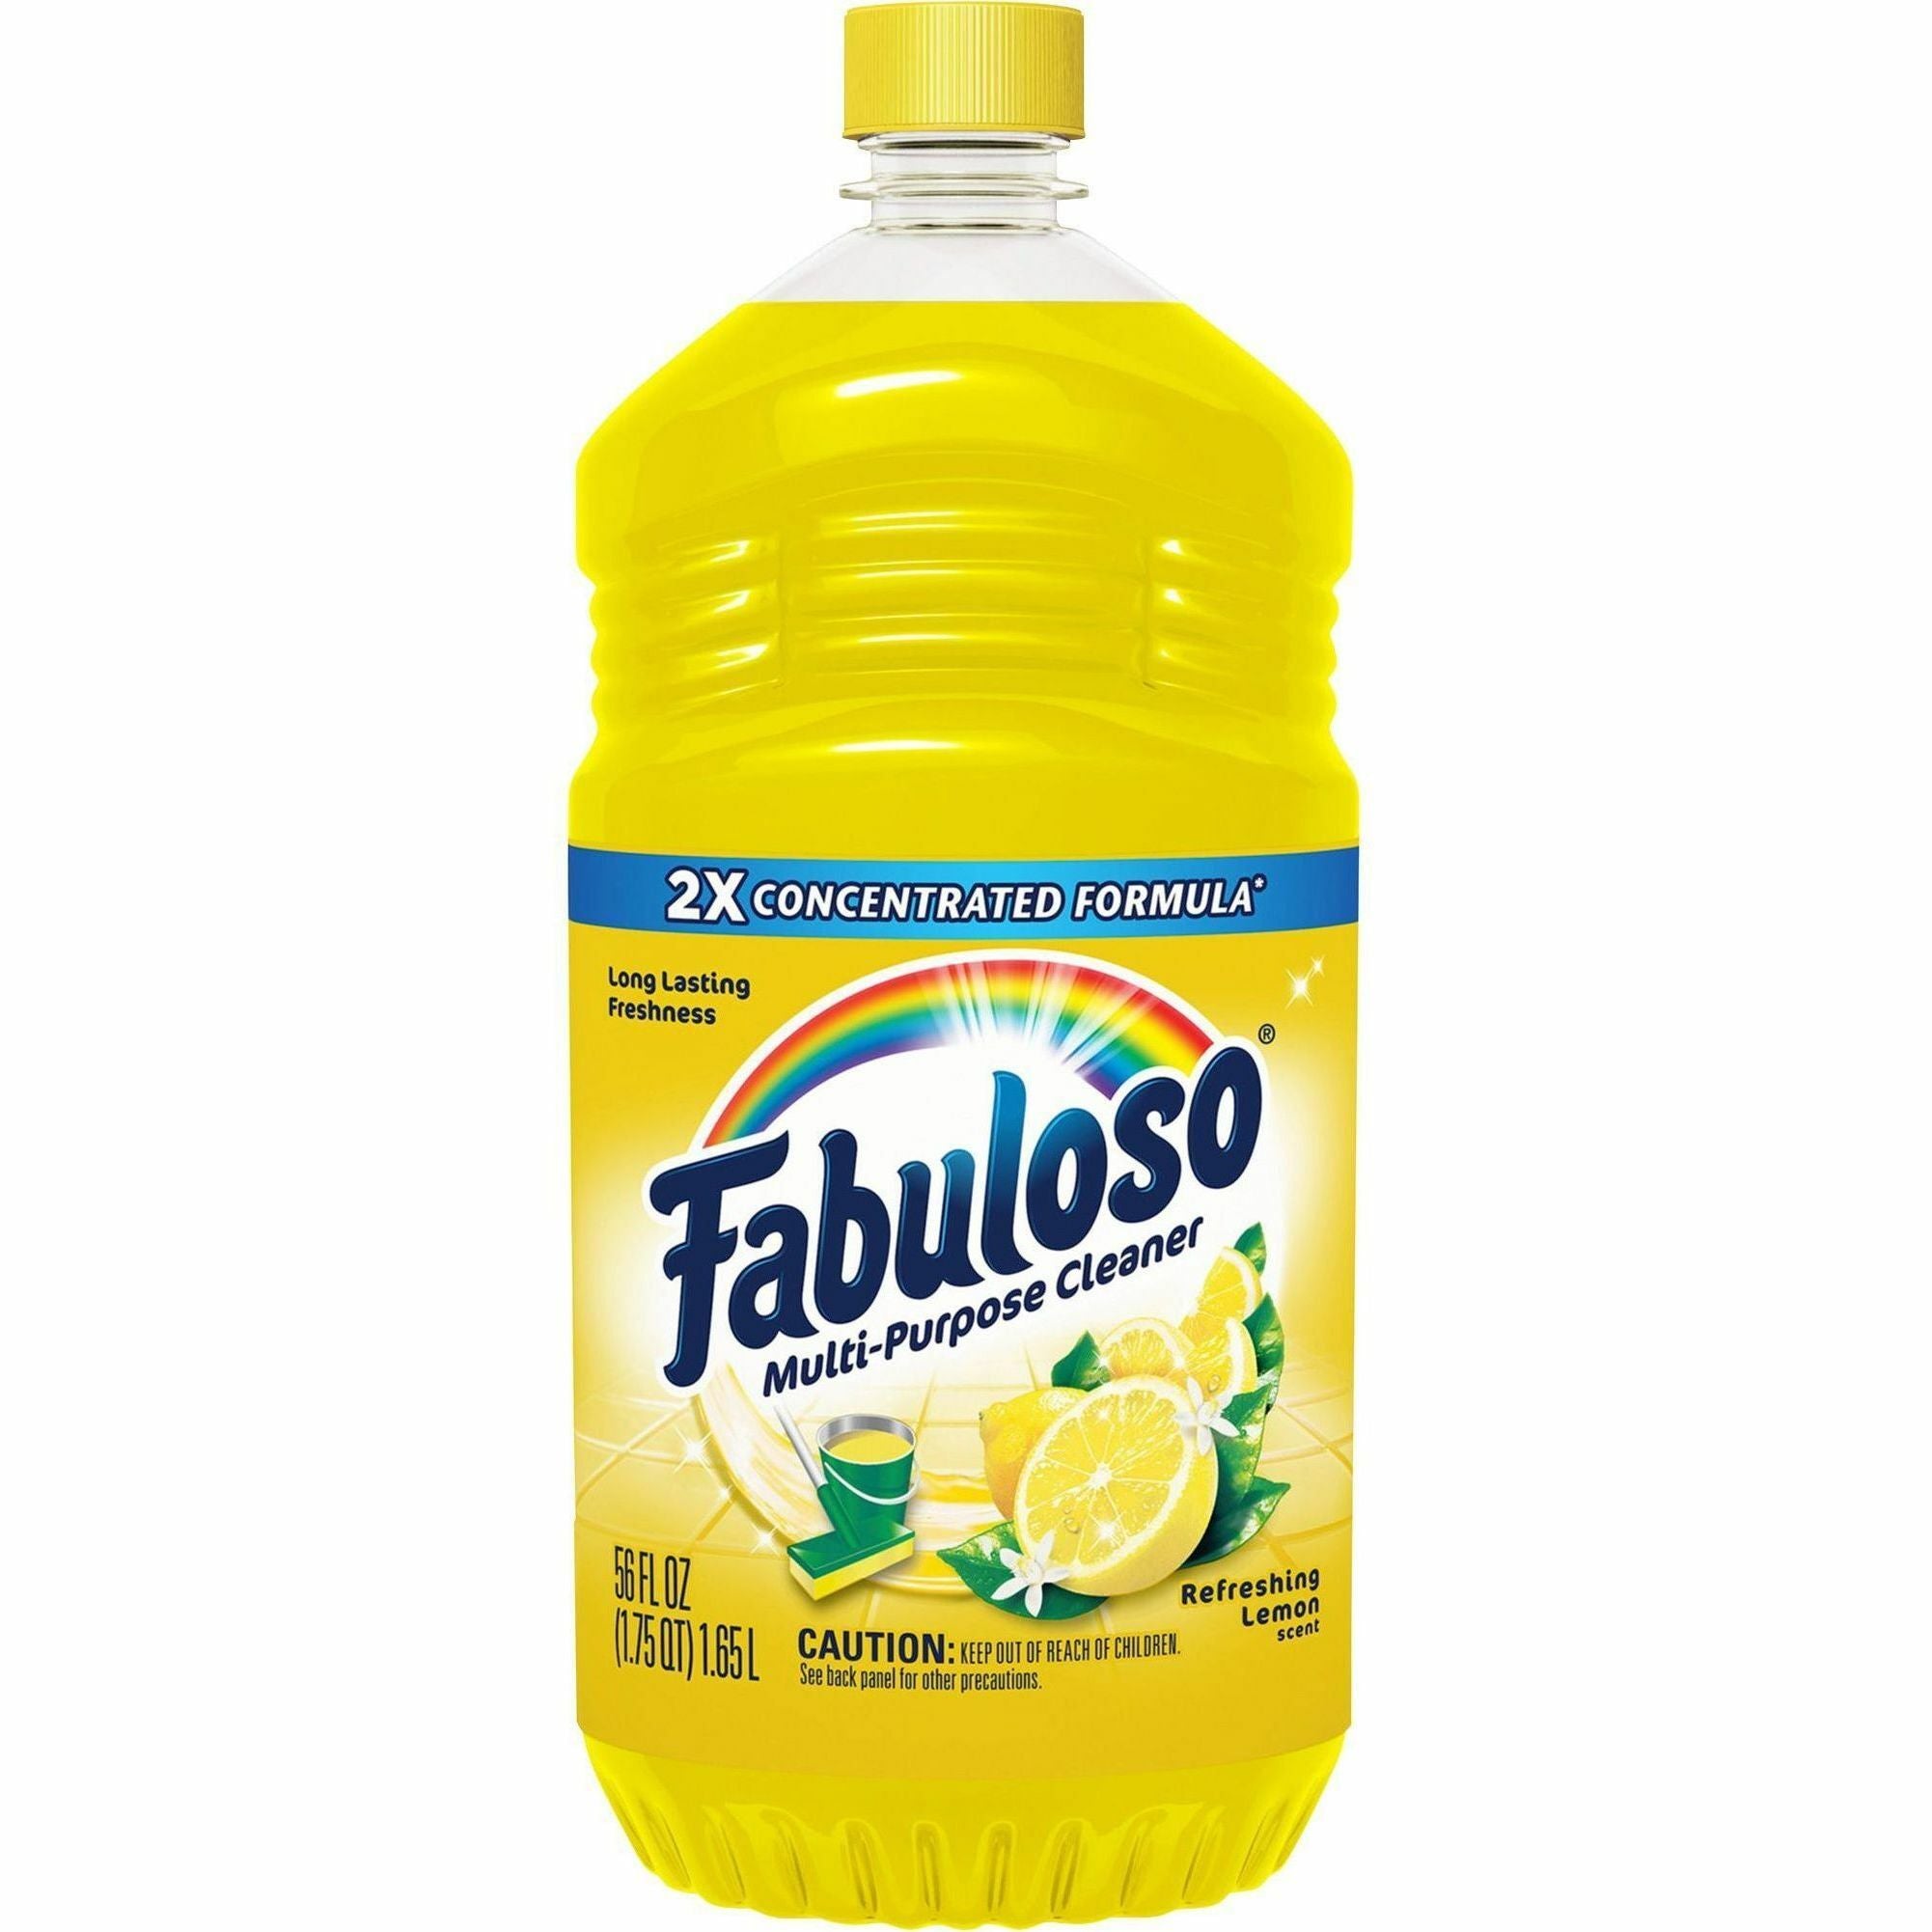 Fabuloso Multi-Purpose Cleaner - For Multipurpose, Multi Surface - Concentrate - 56 fl oz (1.8 quart) - Refreshing Lemon Scent - 6 / Carton - Rinse-free, Residue-free, Long Lasting, Pleasant Scent - Yellow - 2